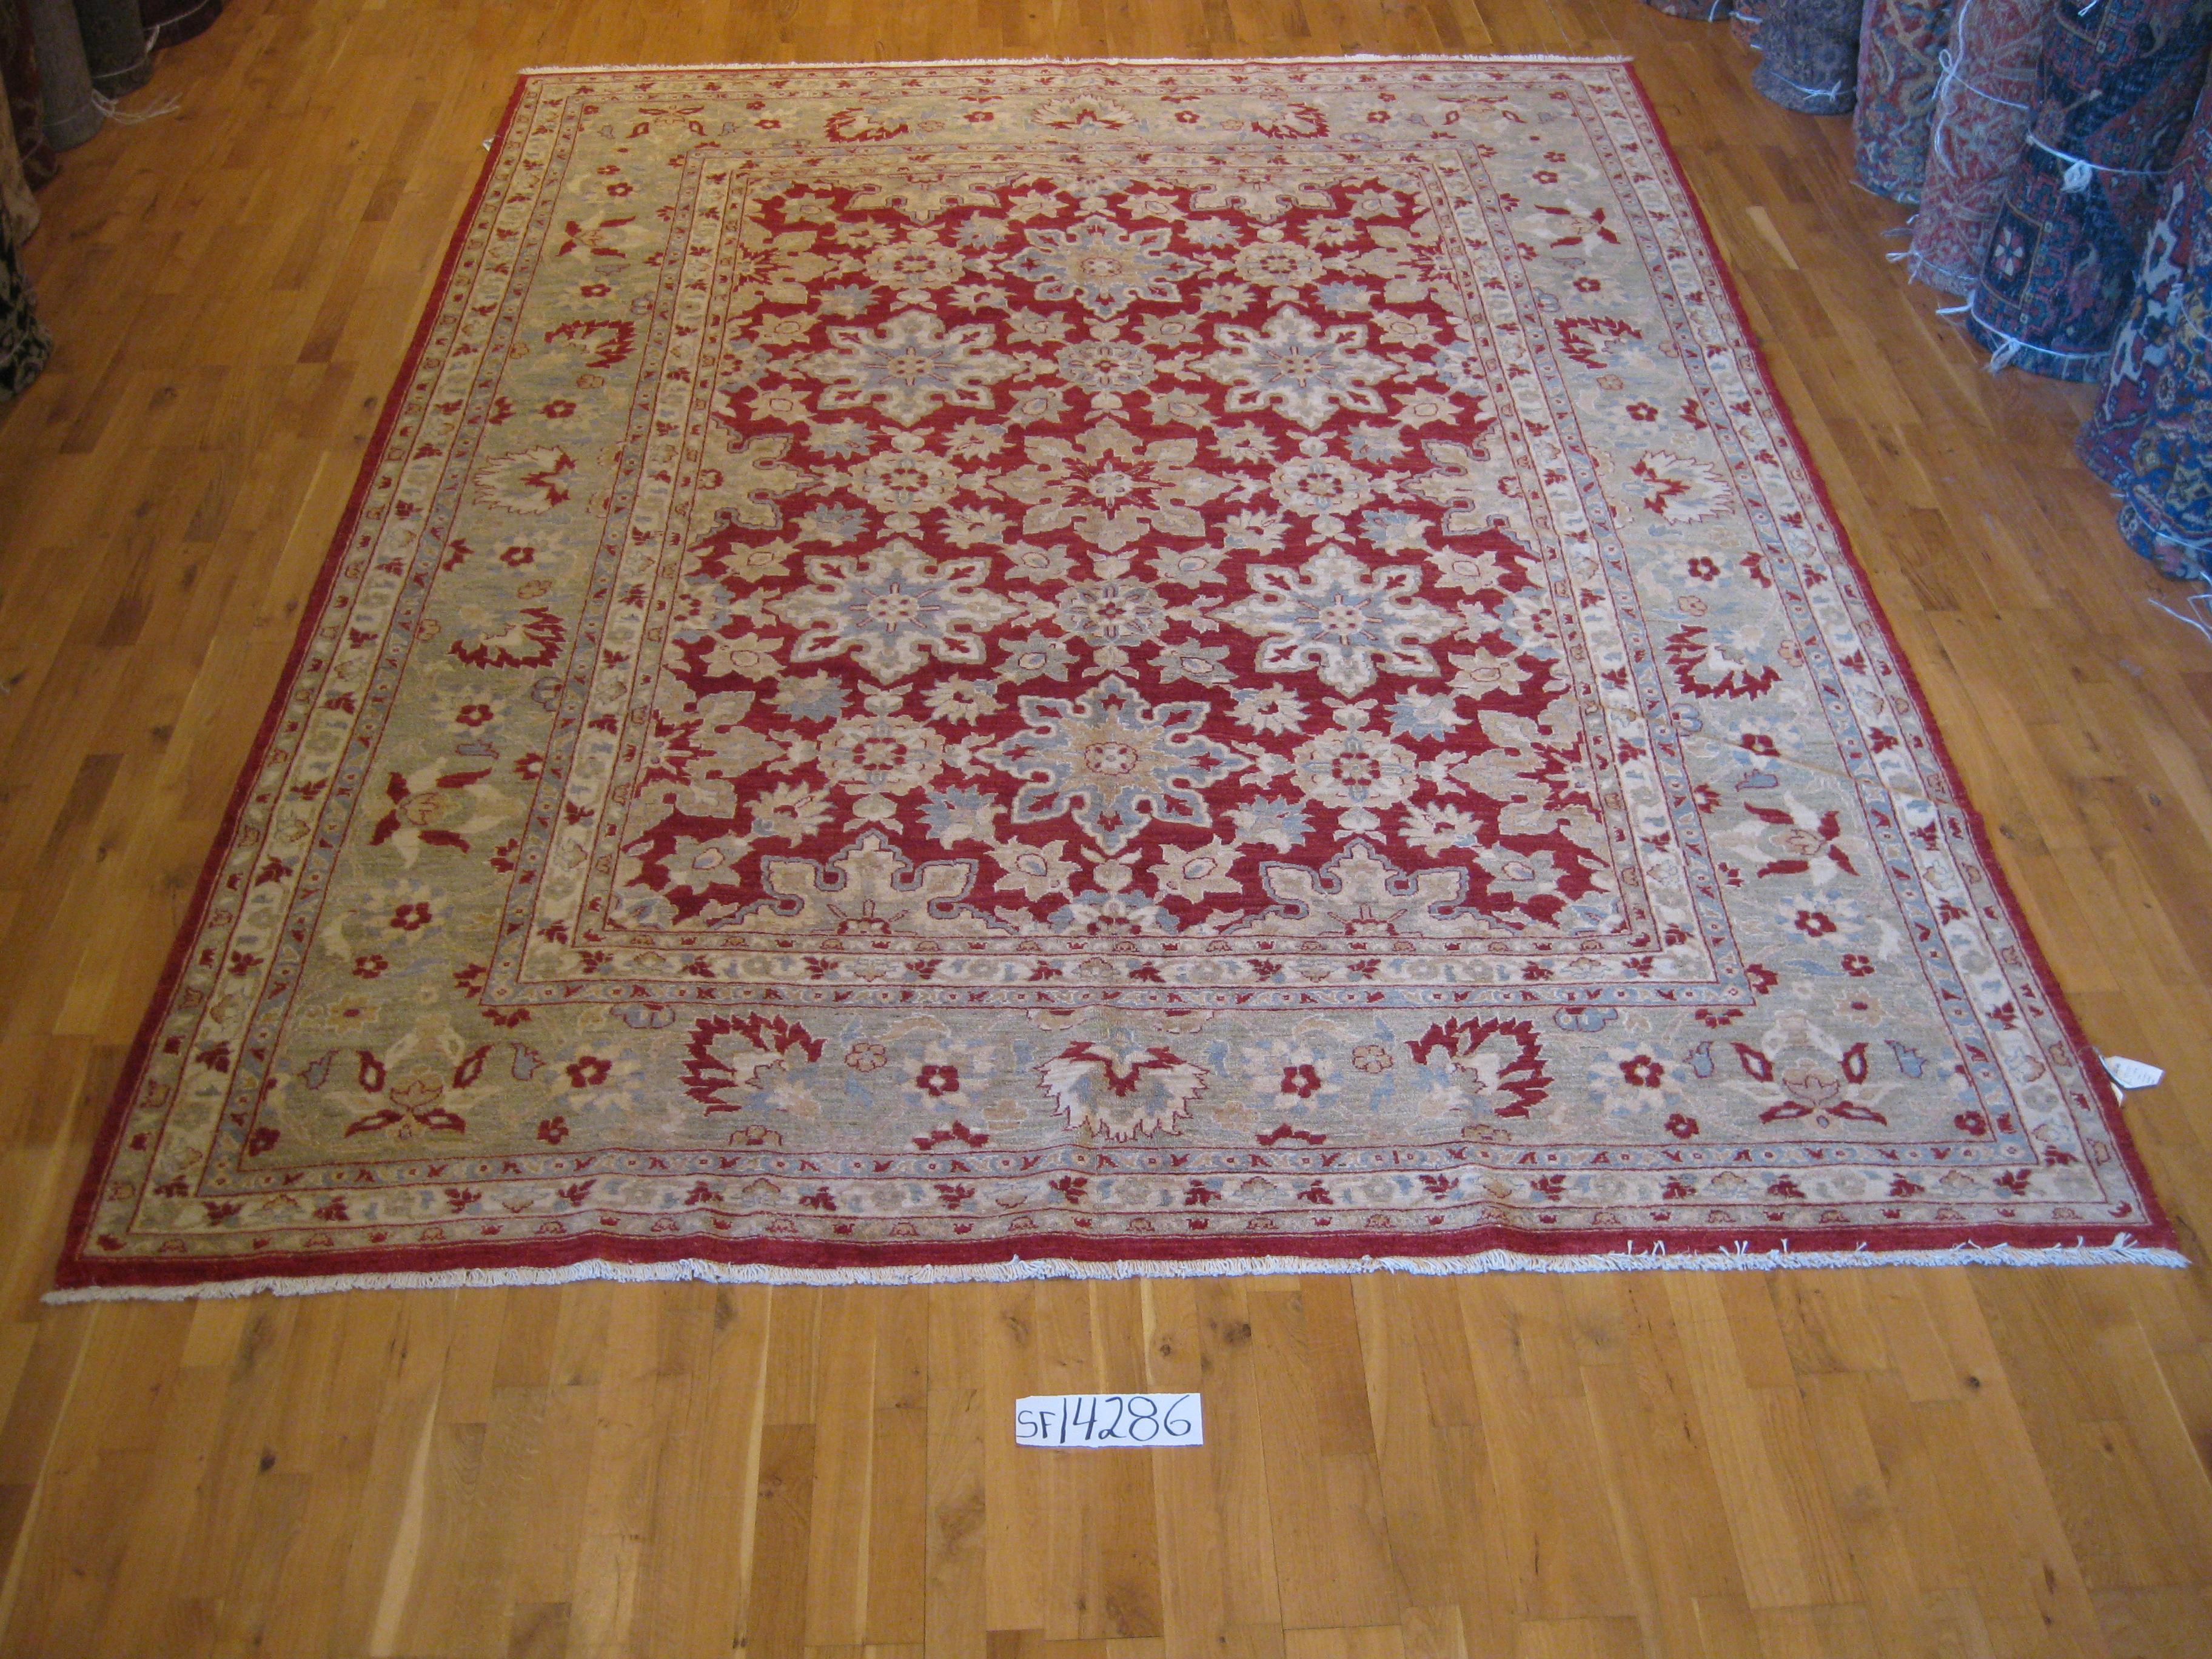 Fine Pakistani rug made with vegetal dye. A stunning piece for the dining area or living room. Durable hand knotted wool construction that is also comfortable under foot.
 